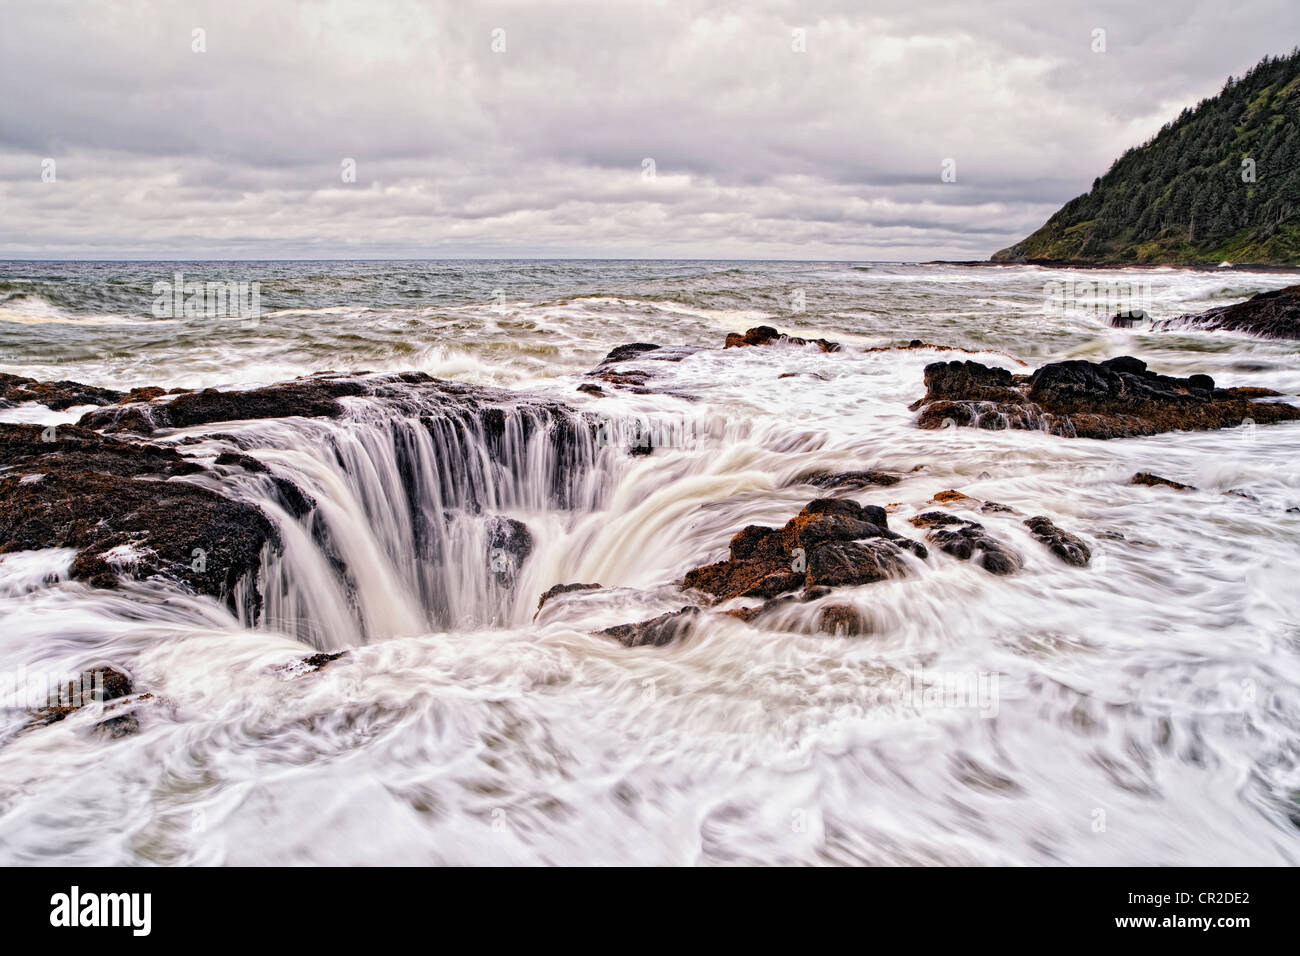 Thor’s Well is constantly replenished by the storm driven high tide at Oregon’s Cape Perpetua Scenic Area. Stock Photo